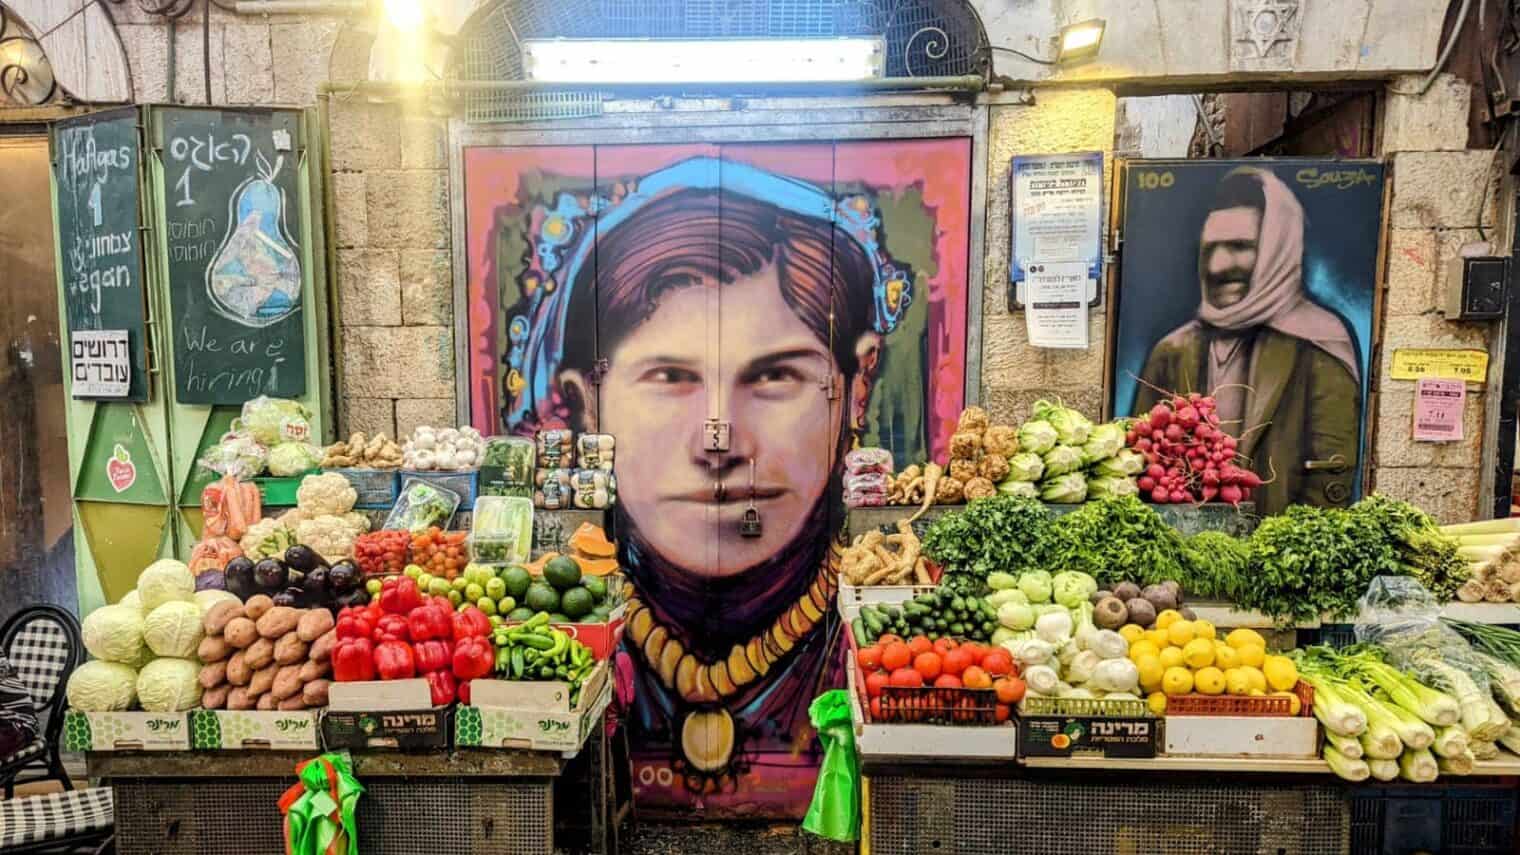 This market stall in Machane Yehuda’s Agas (Pear) Street got a centennial facelift with portraits of the original house’s owners, Bachora and Meir Banai. Photo by Solomon Souza